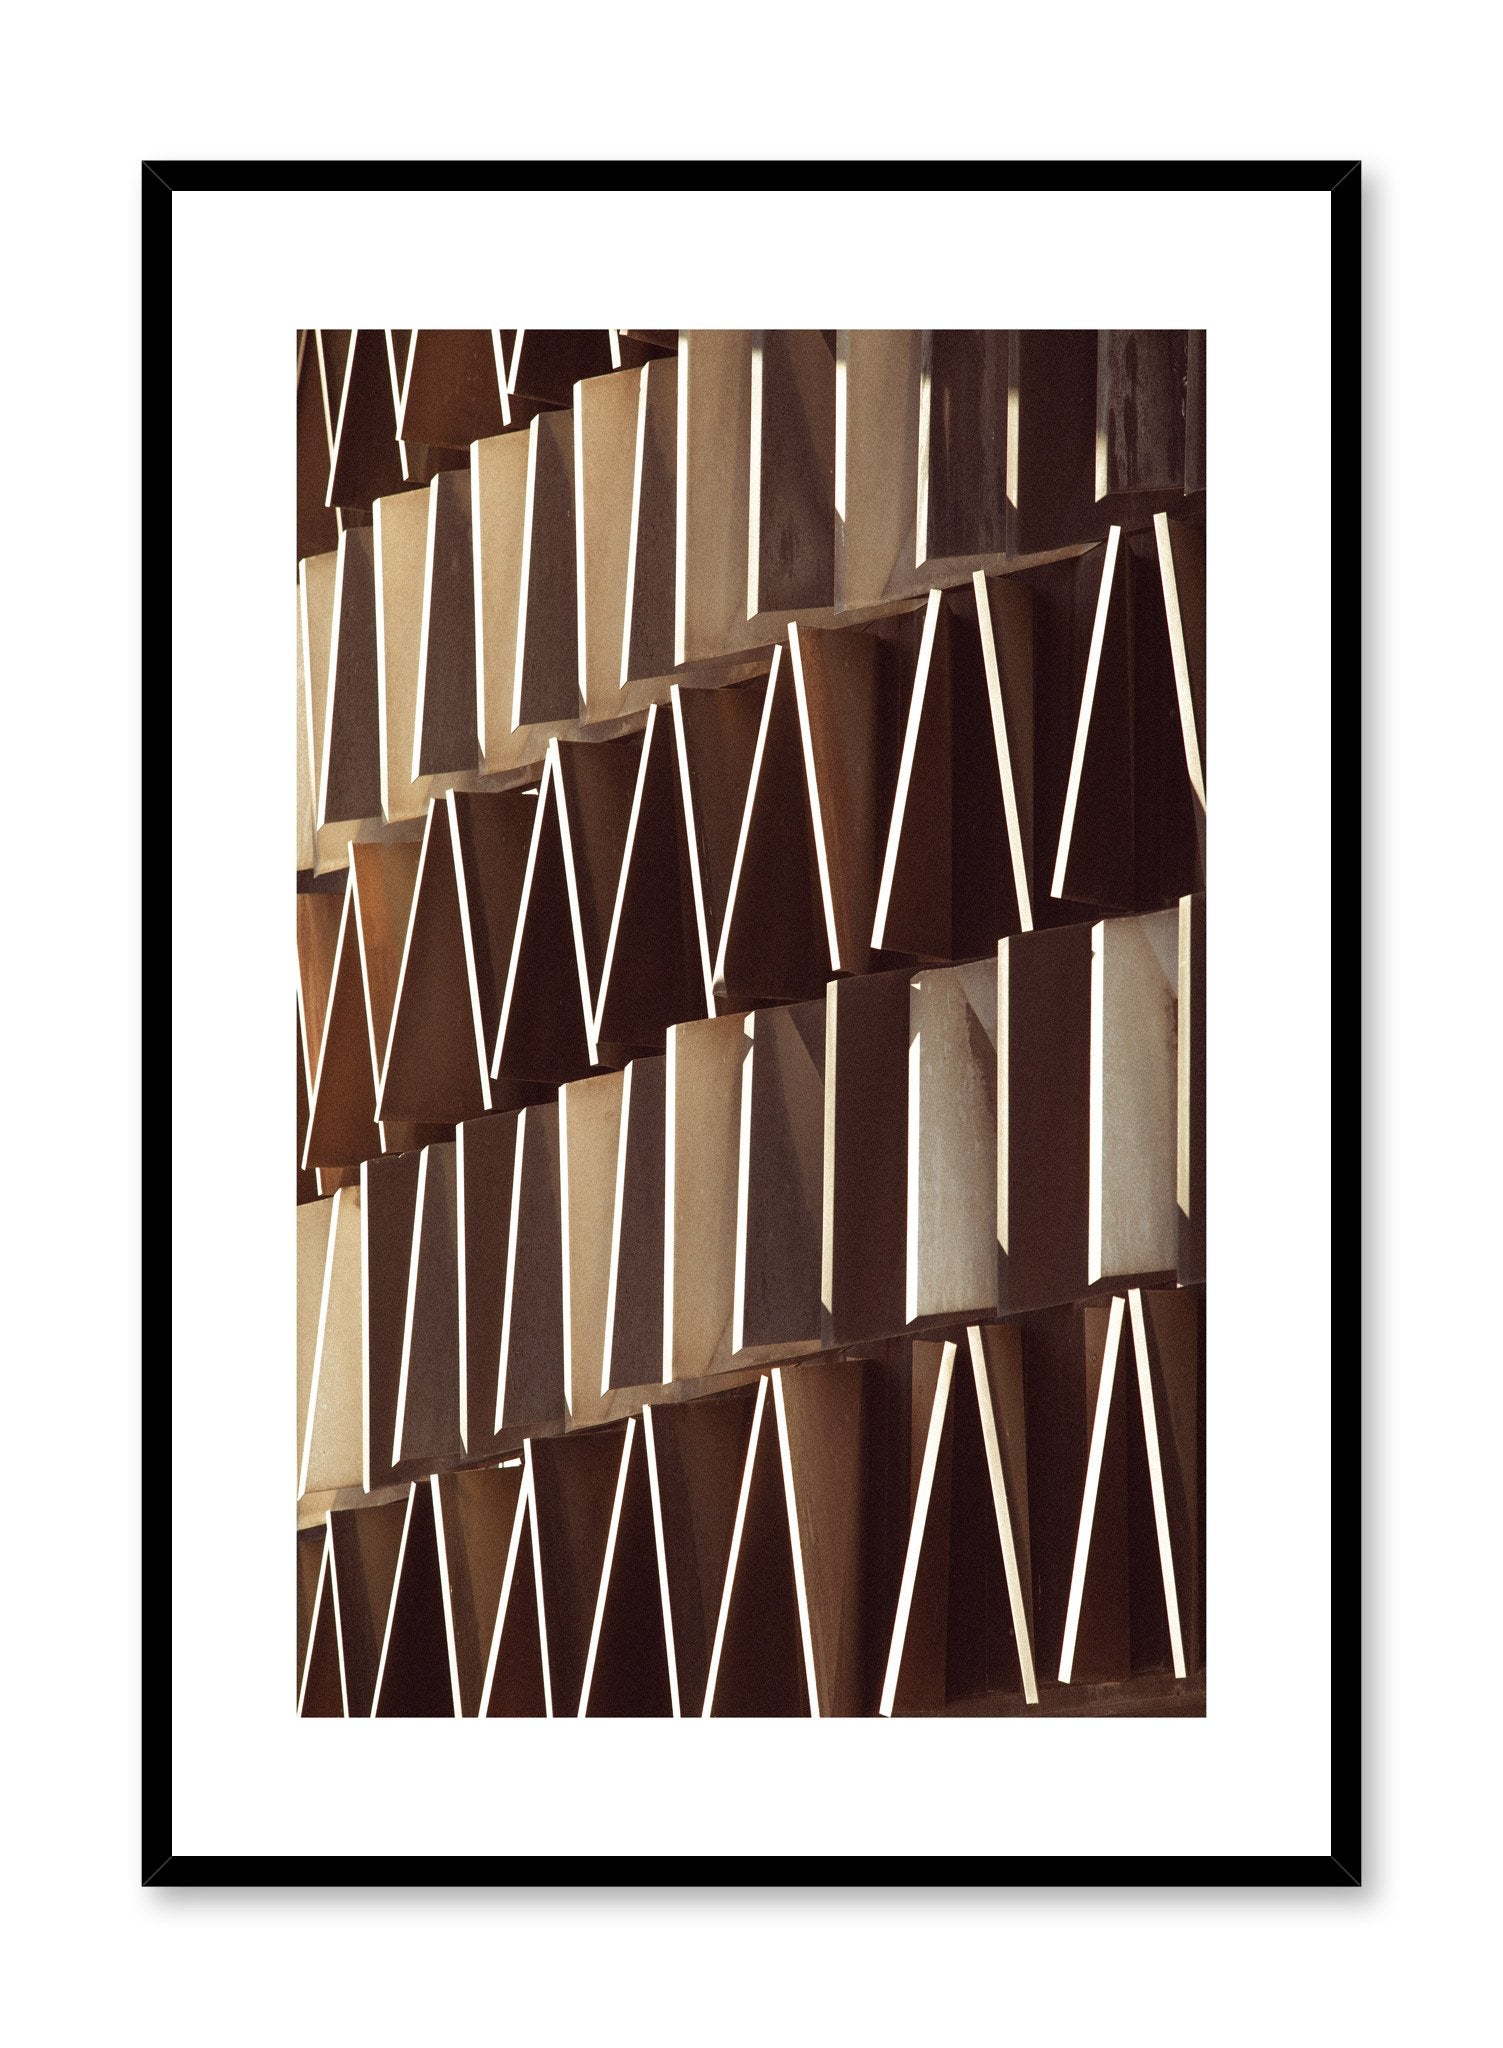 Modern minimalist poster by Opposite Wall with photography of different shapes on a building